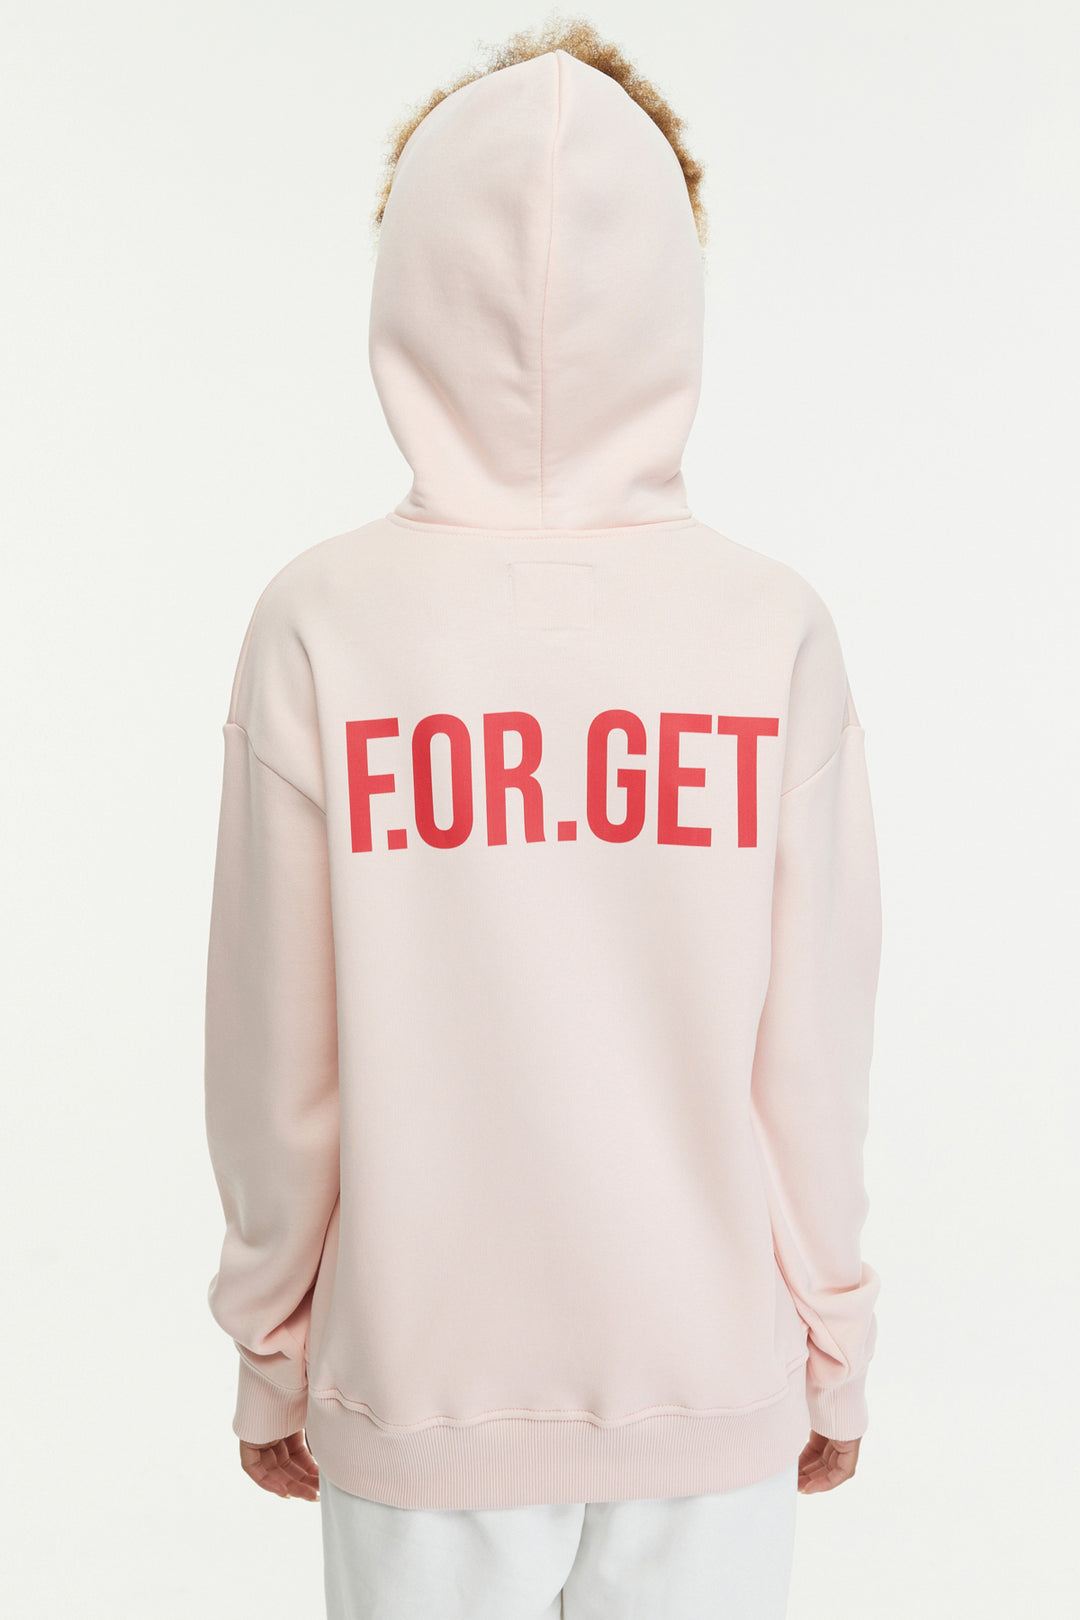 Forget / Oversized Pullover Hoodie